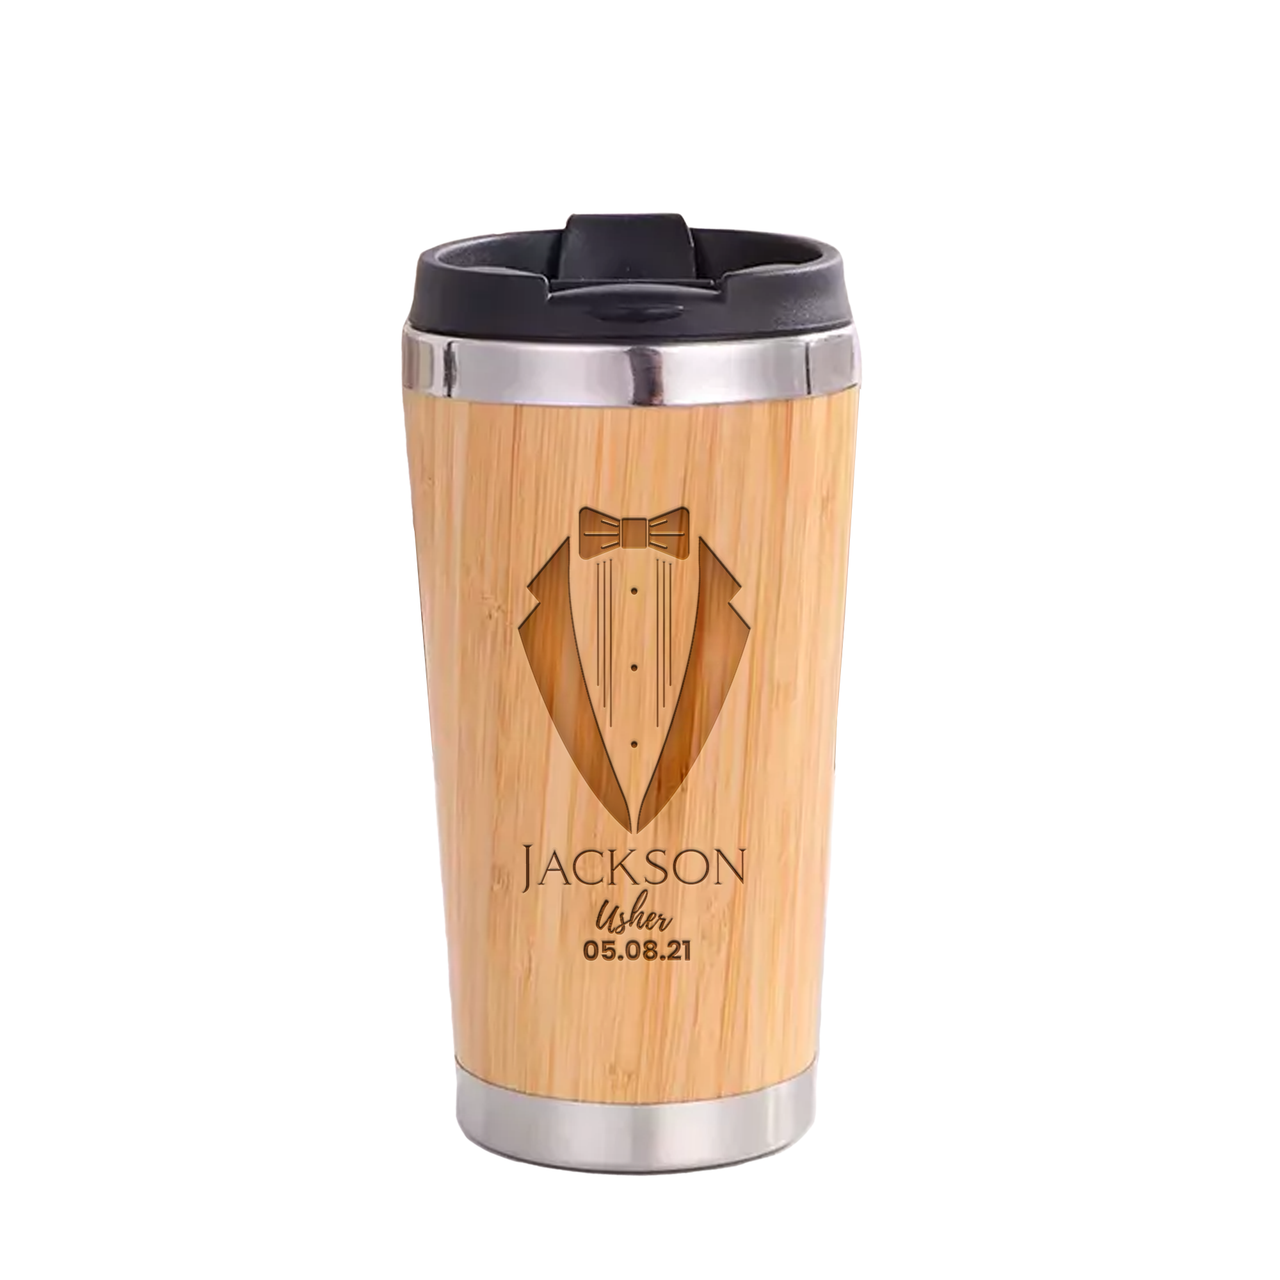 Custom Tumbler Groomsmen Gifts Perfect for Best Man and Fathers of the Bride & Groom